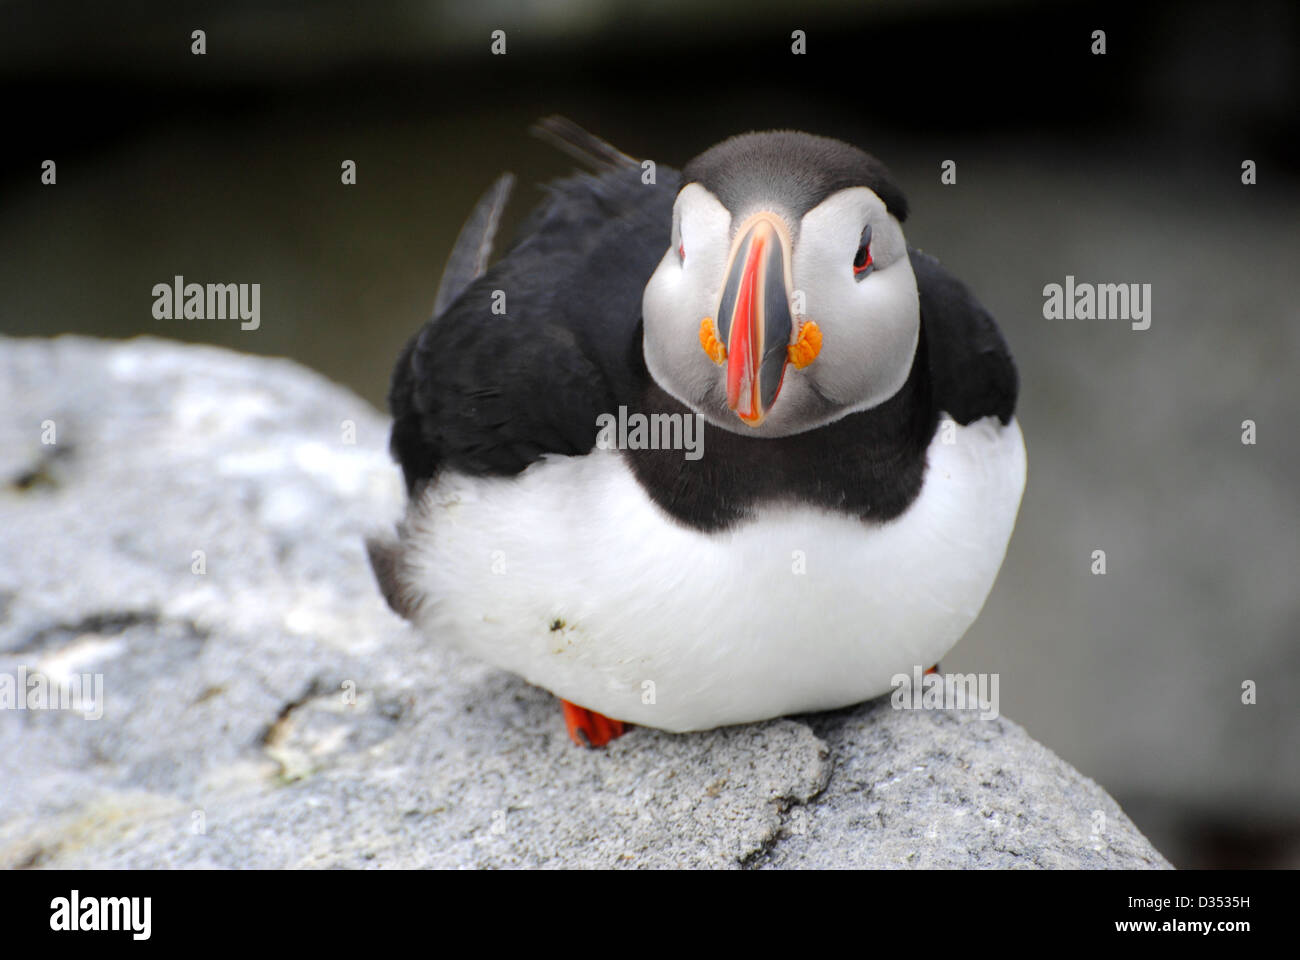 A single Puffin laying on the rocky ledge. Stock Photo